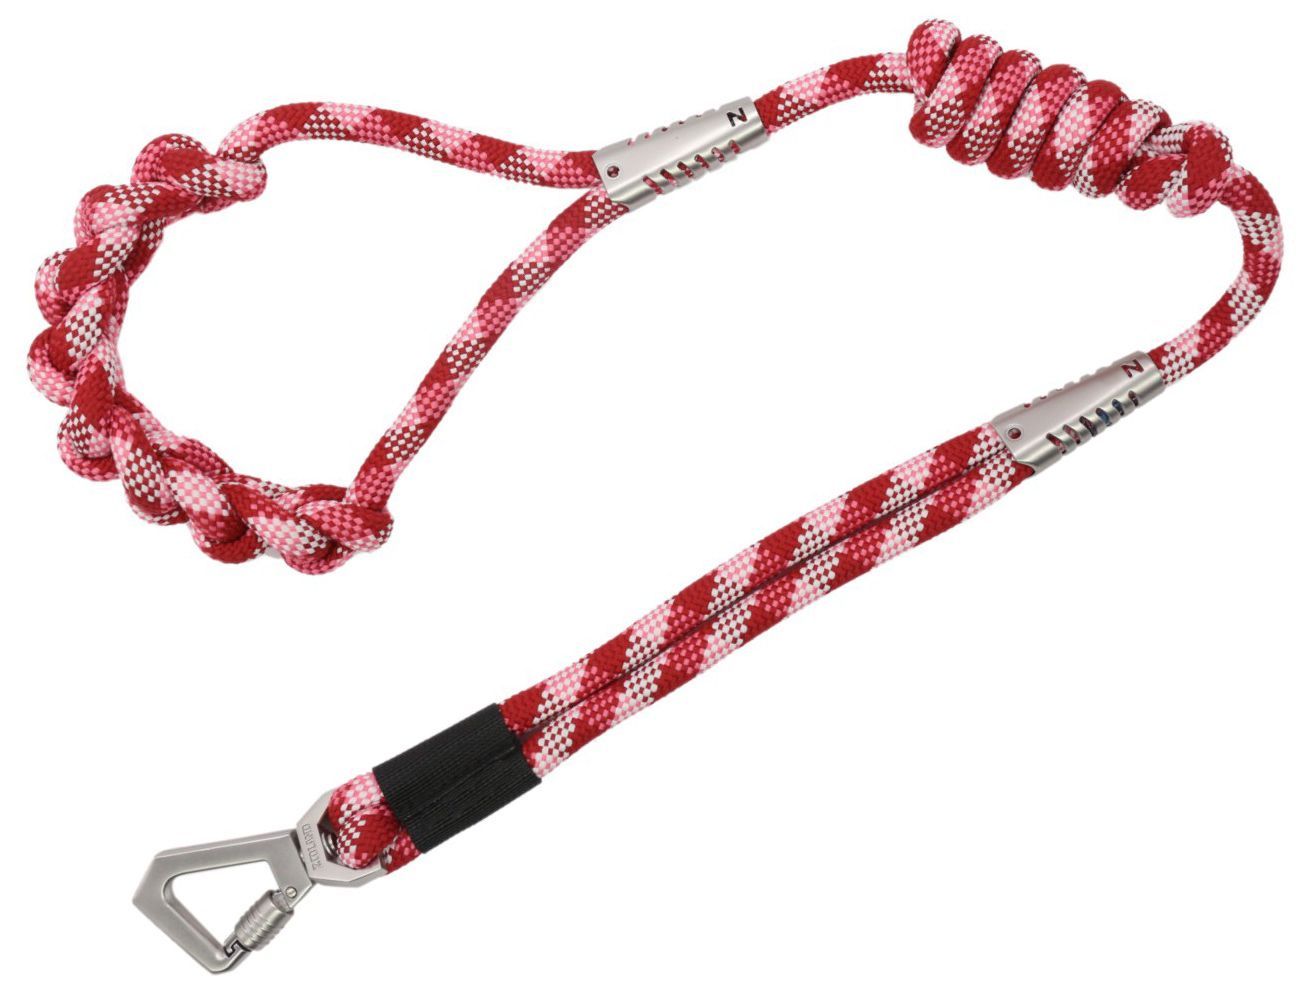 Pet Life ® 'Neo-Craft' Handmade One-Piece Knot-Gripped Training Dog Leash Red 